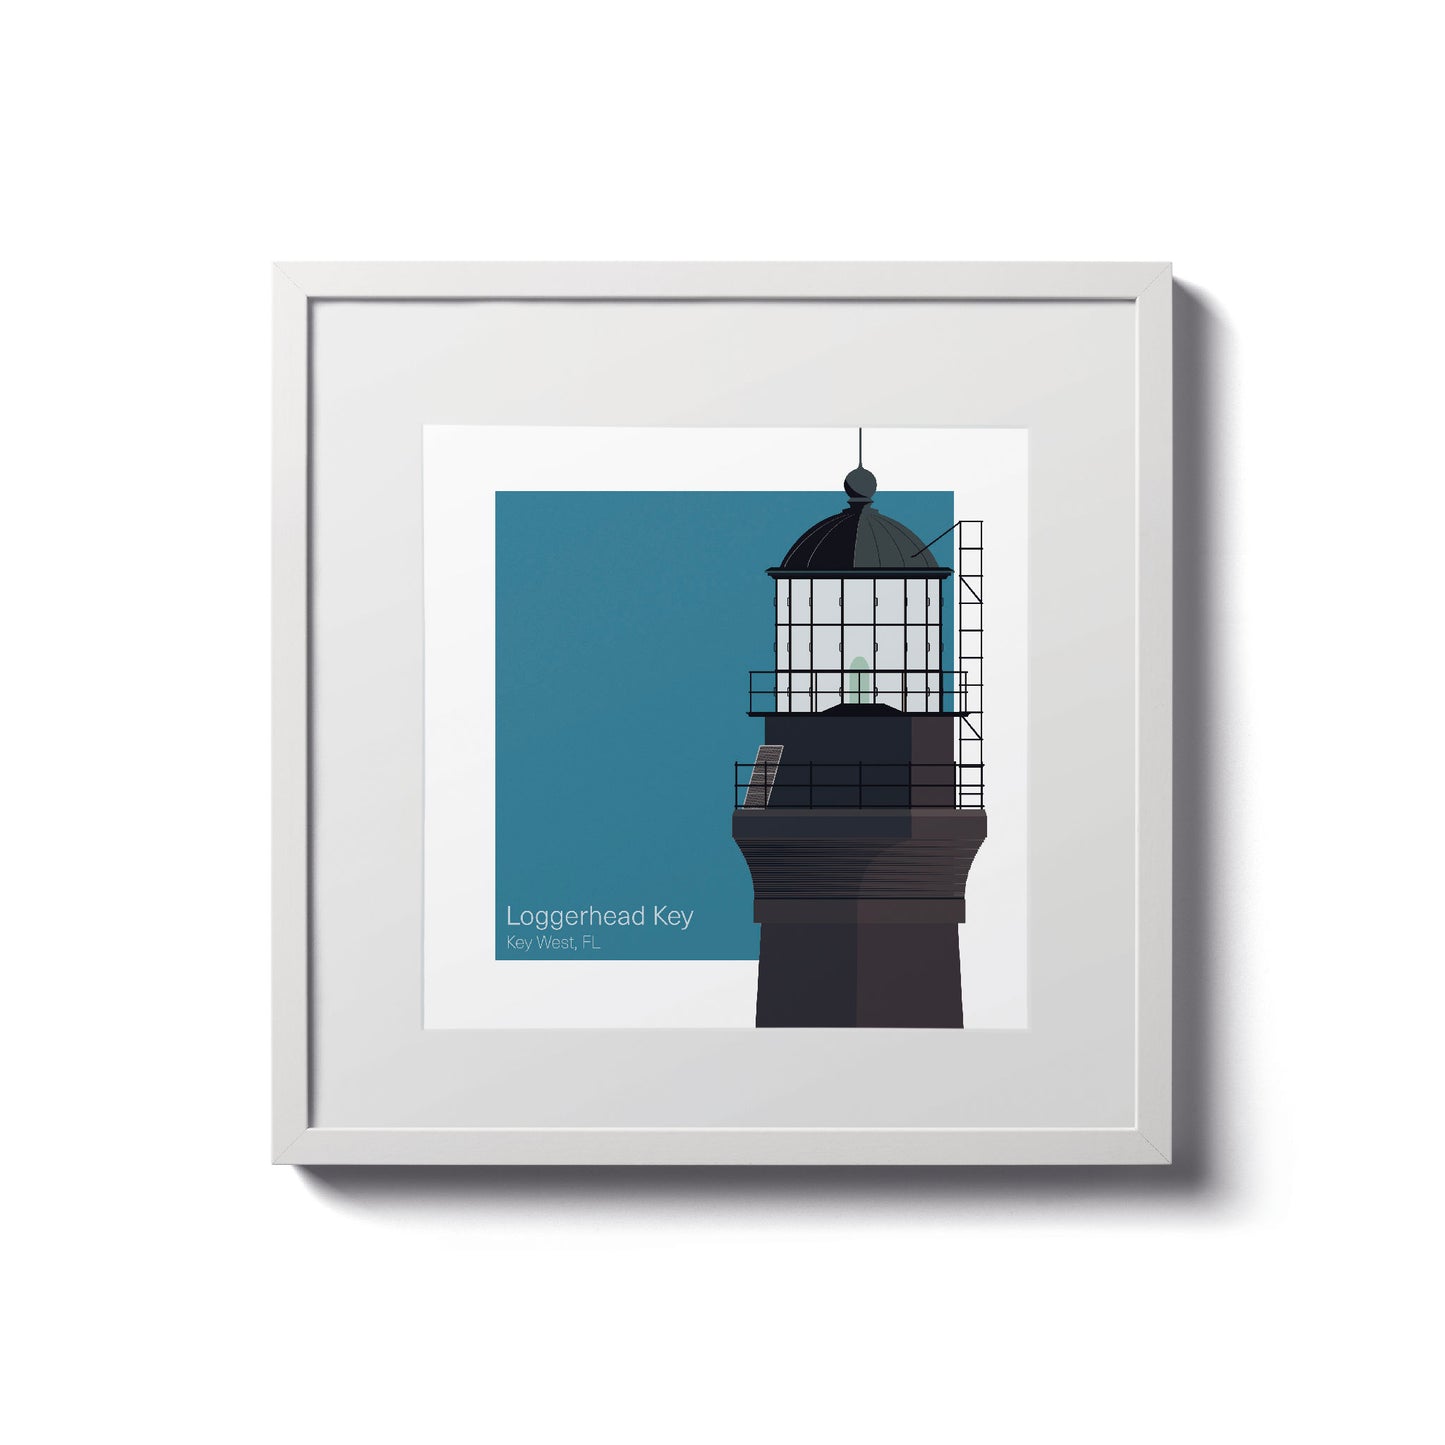 Illustration of the Loggerhead lighthouse, FL, USA. On a white background with aqua blue square as a backdrop., in a white frame  and measuring 8"x8" (20x20cm).